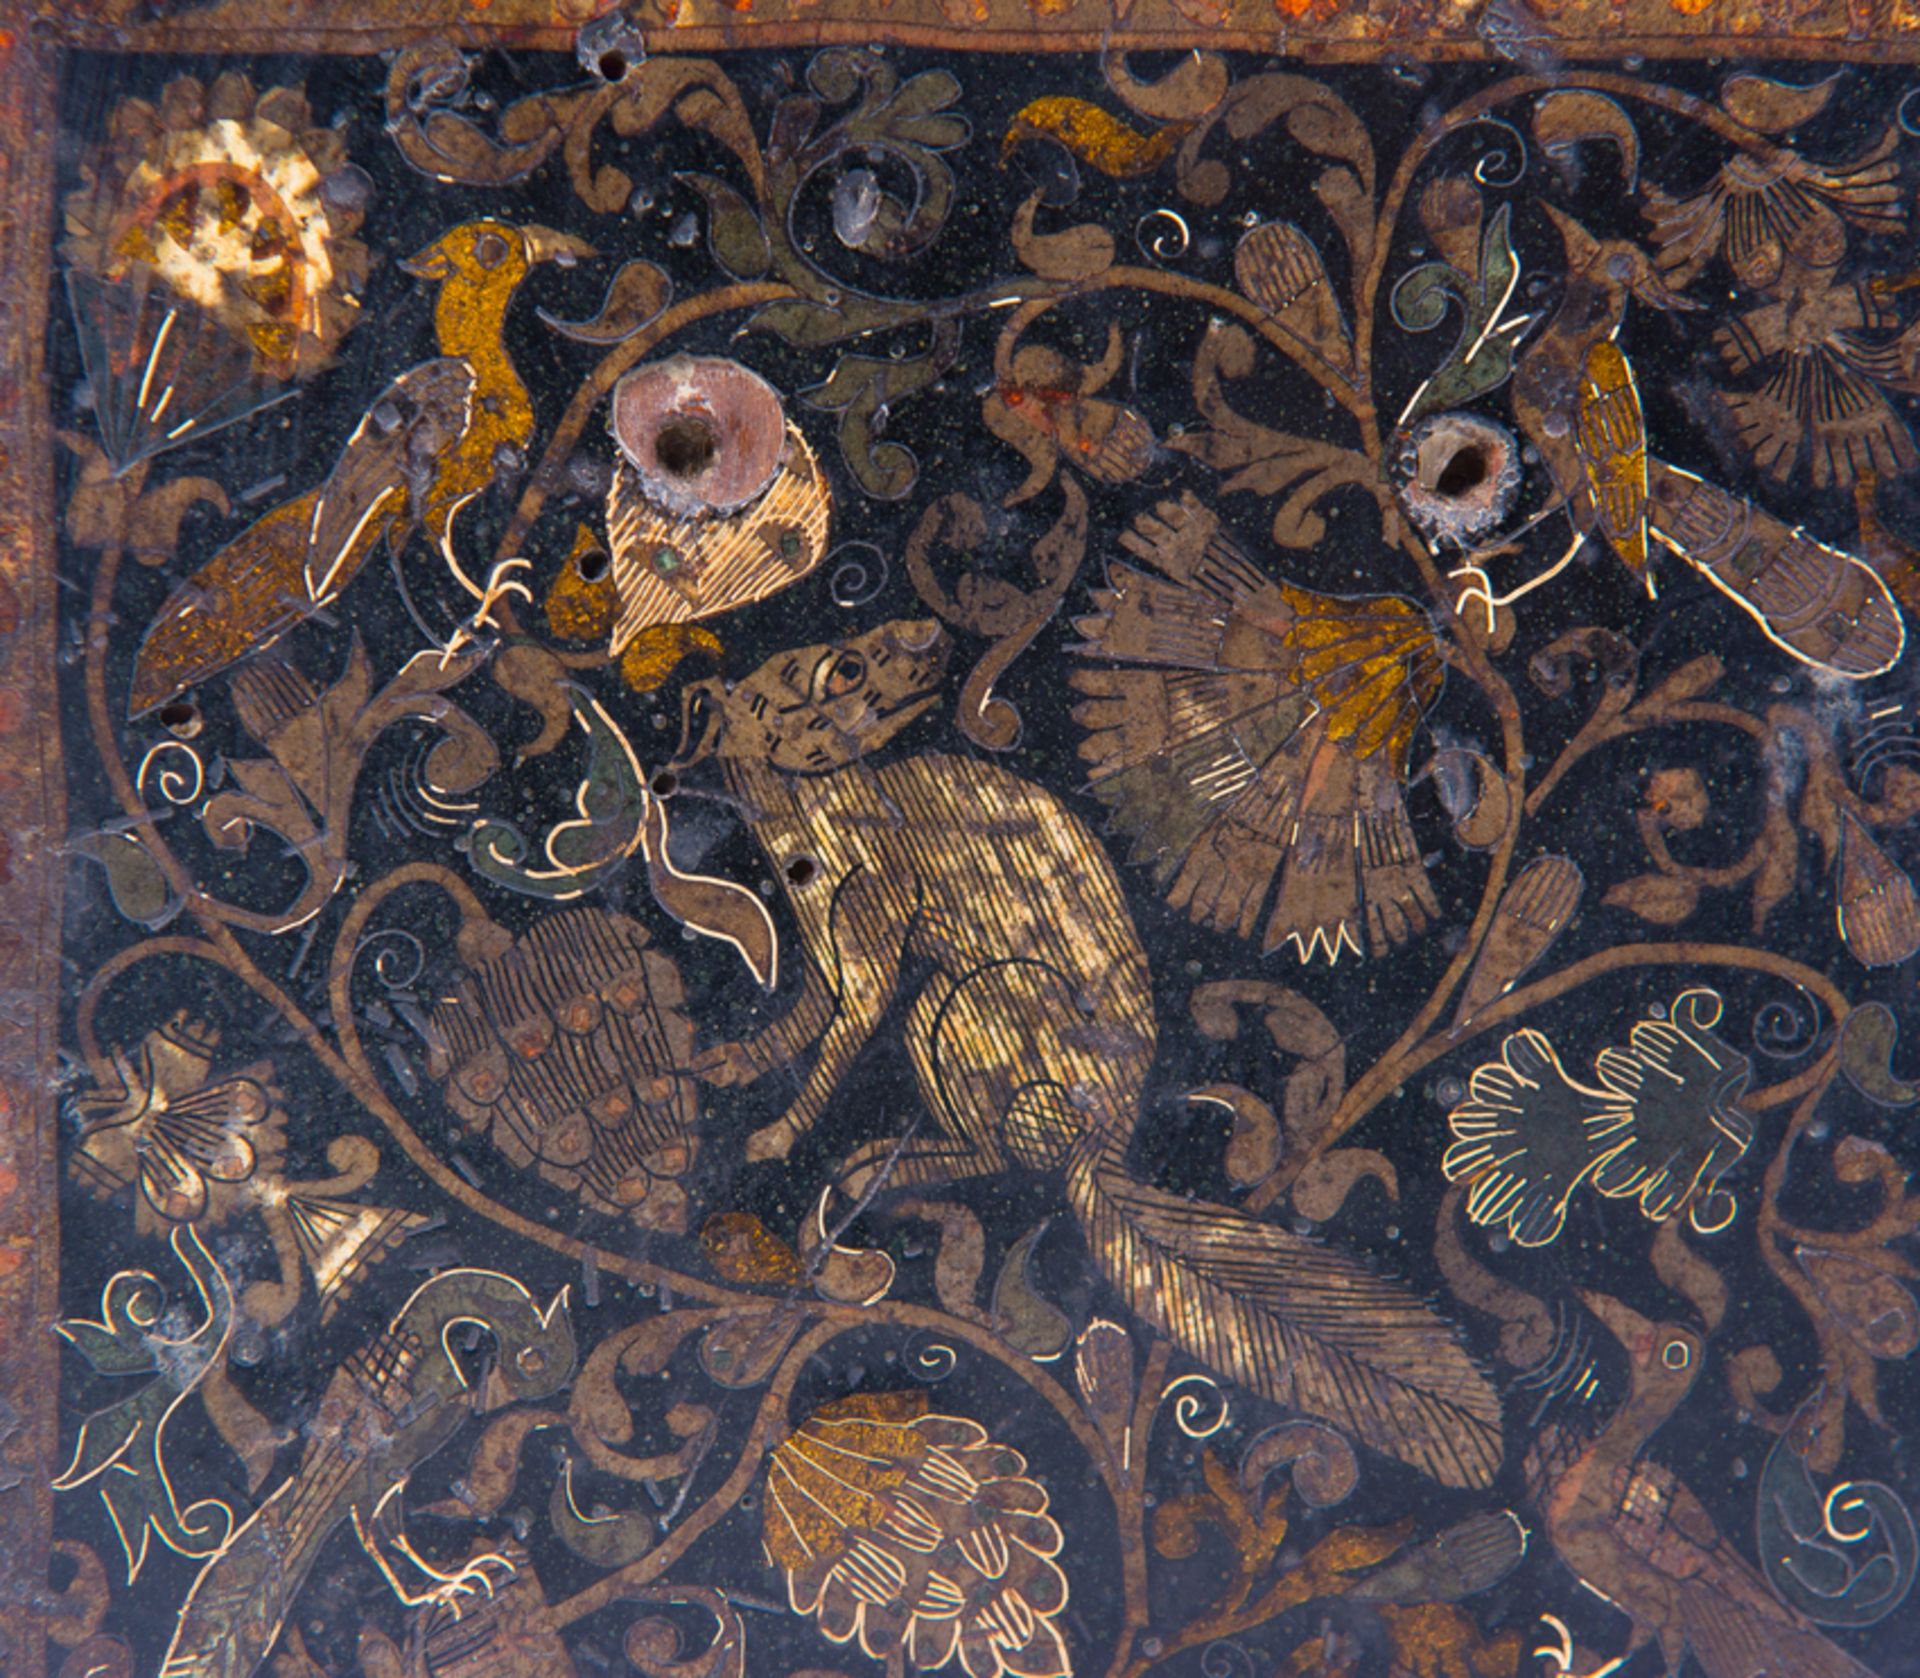 Chest made using the "pasto varnish" technique (mopa mopa plant varnish). Colombia. 17th-18th centur - Image 13 of 17